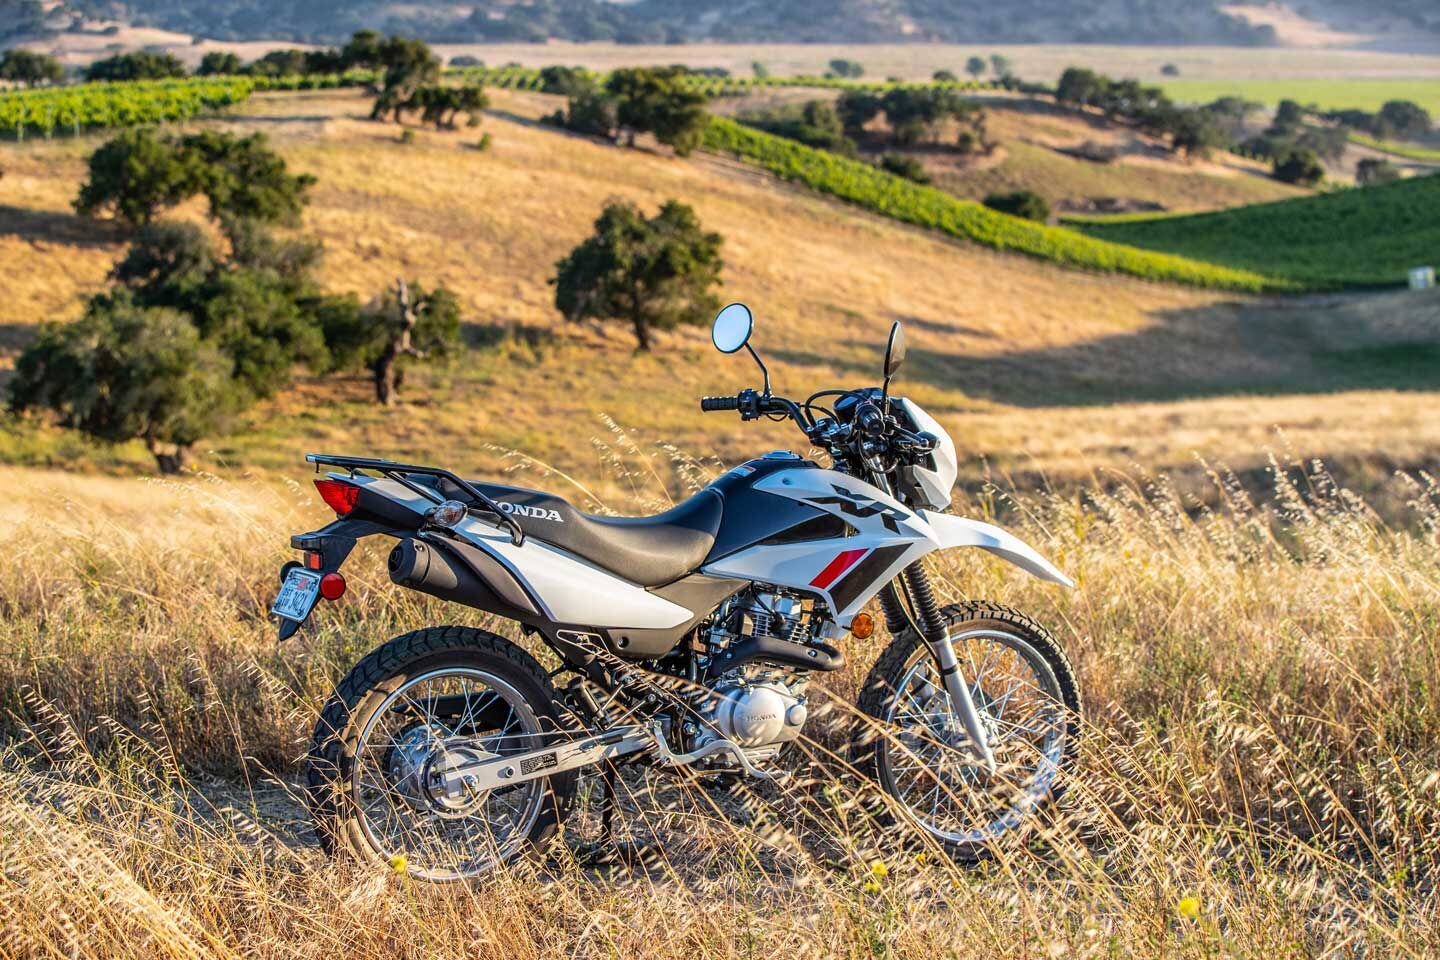 Honda claims the XR150L has a 2.8-gallon gas tank with a fuel range of 346 miles.